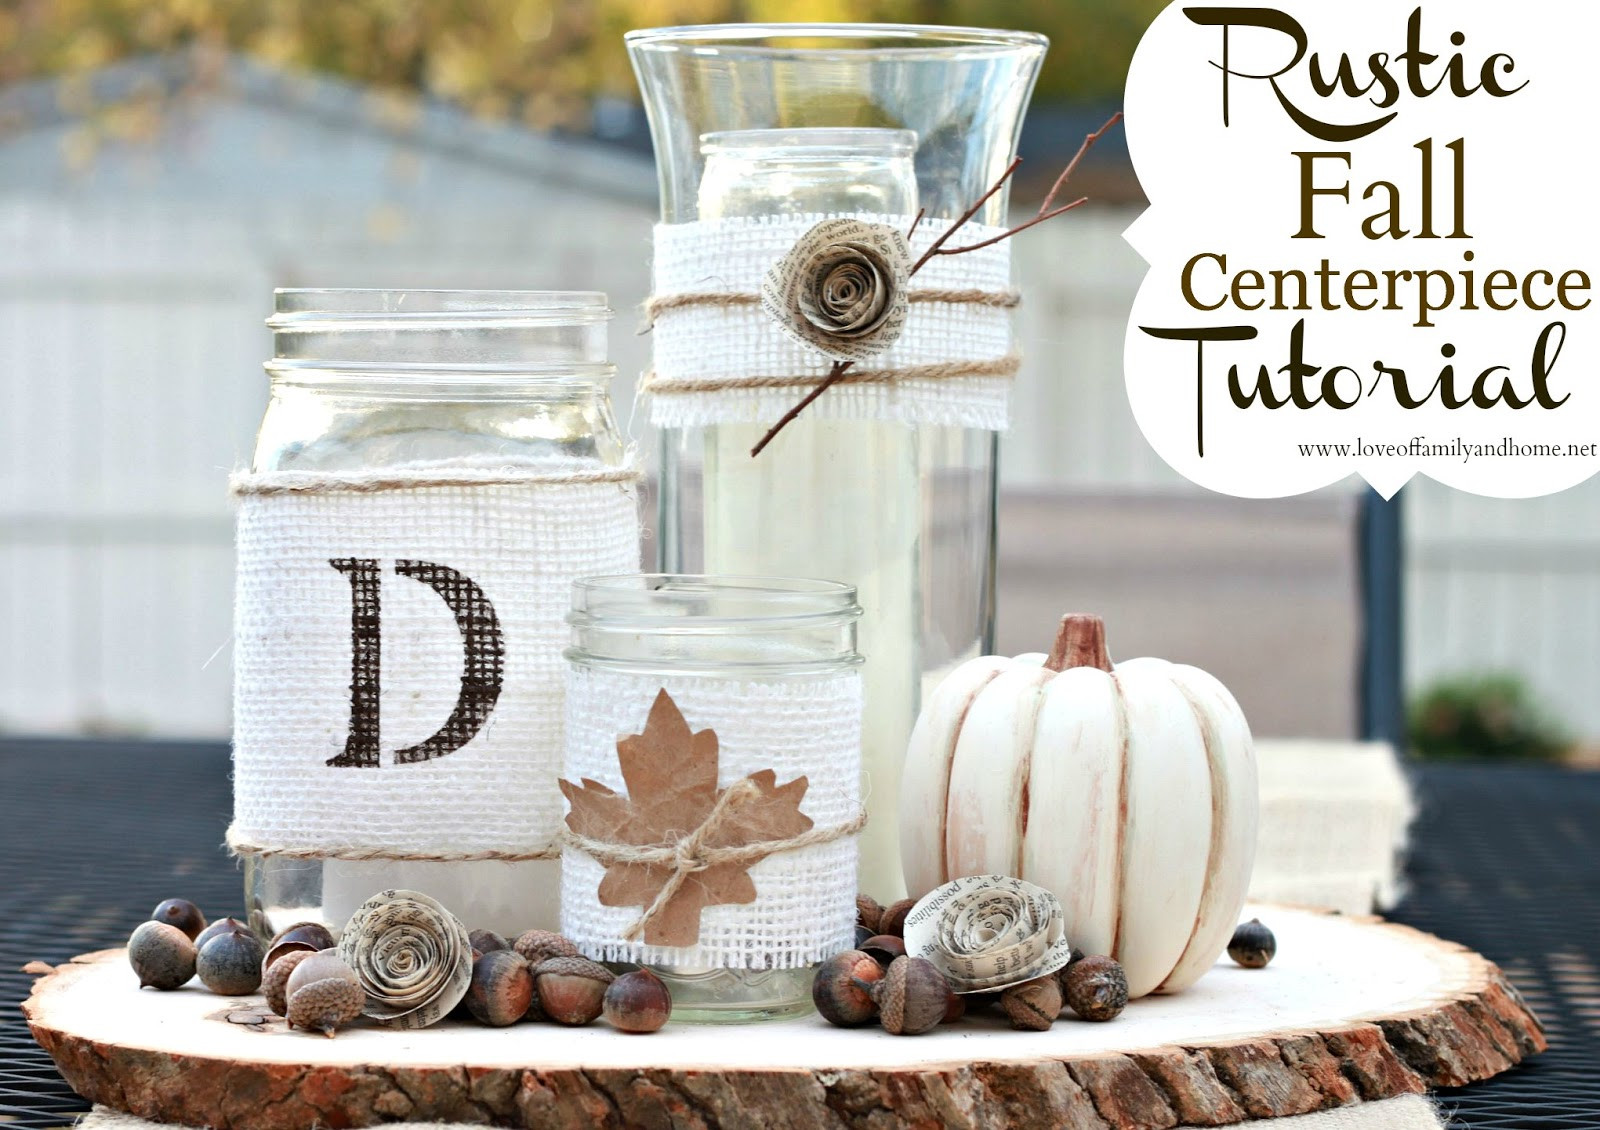 Rustic Wedding Centerpieces DIY
 Rustic Fall Centerpiece Tutorial Love of Family & Home